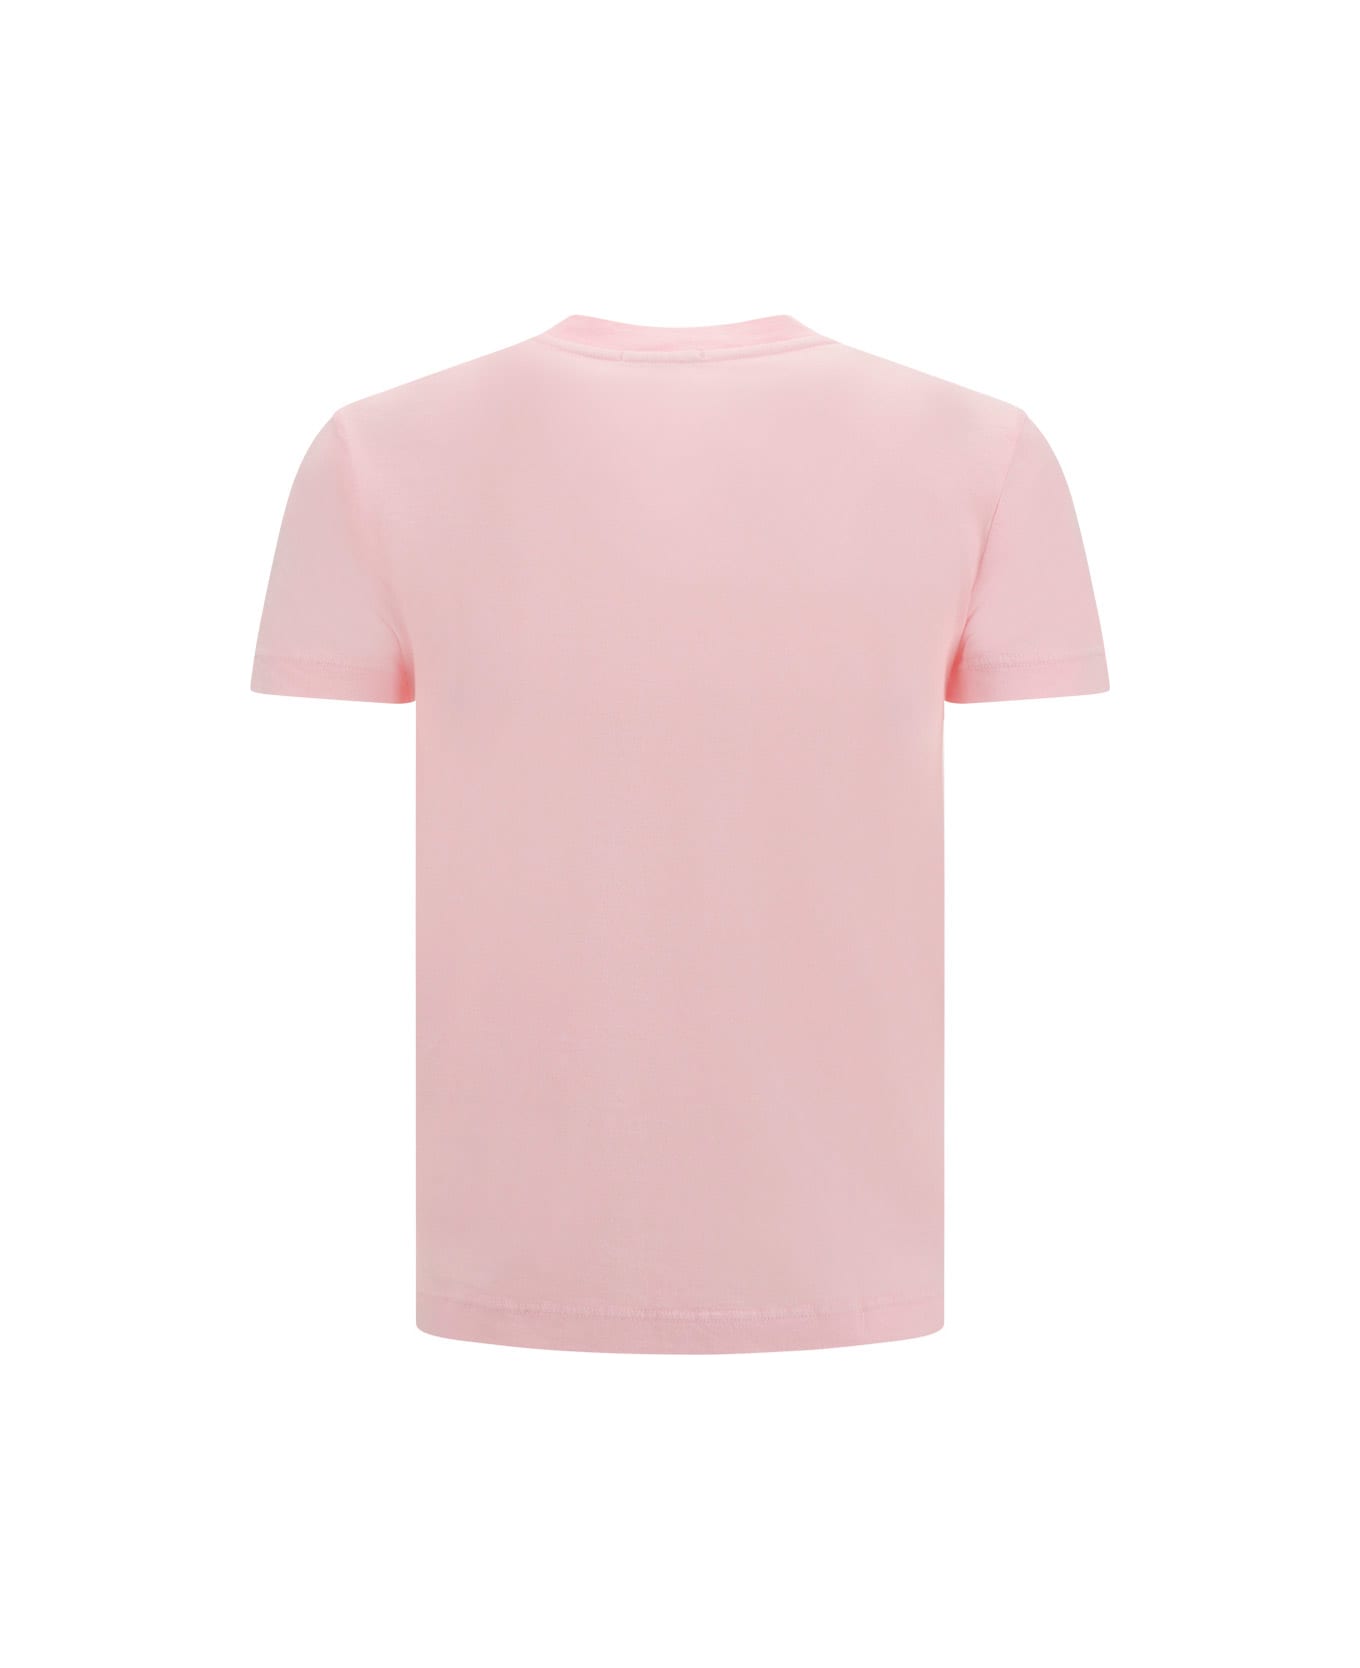 James Perse T-shirt - Oxford Pink Pigment